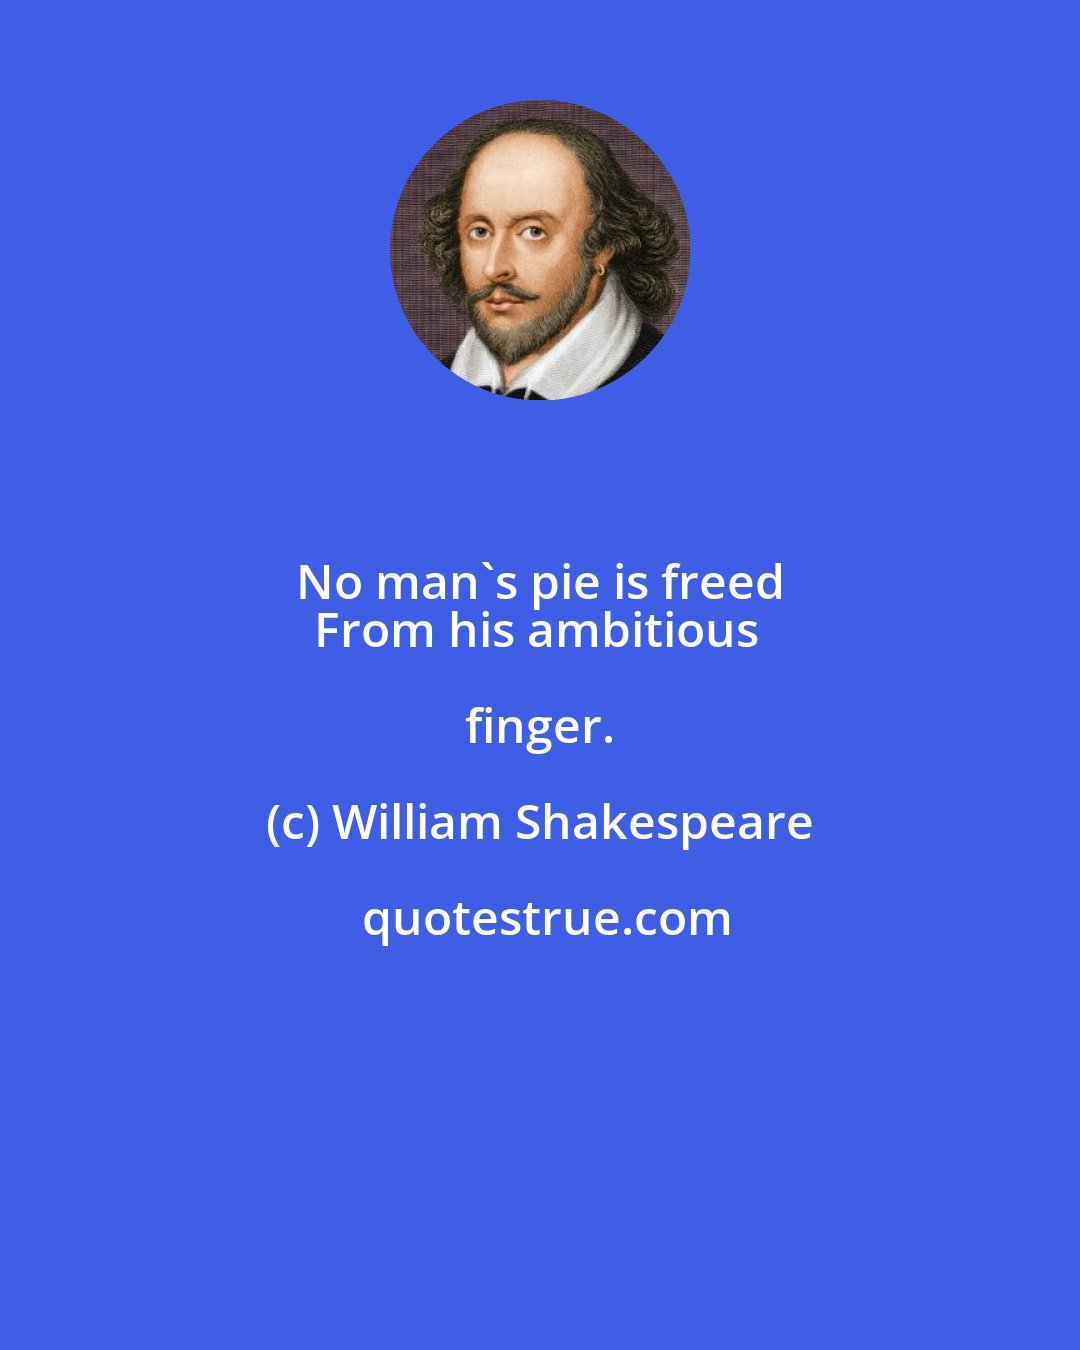 William Shakespeare: No man's pie is freed 
From his ambitious finger.